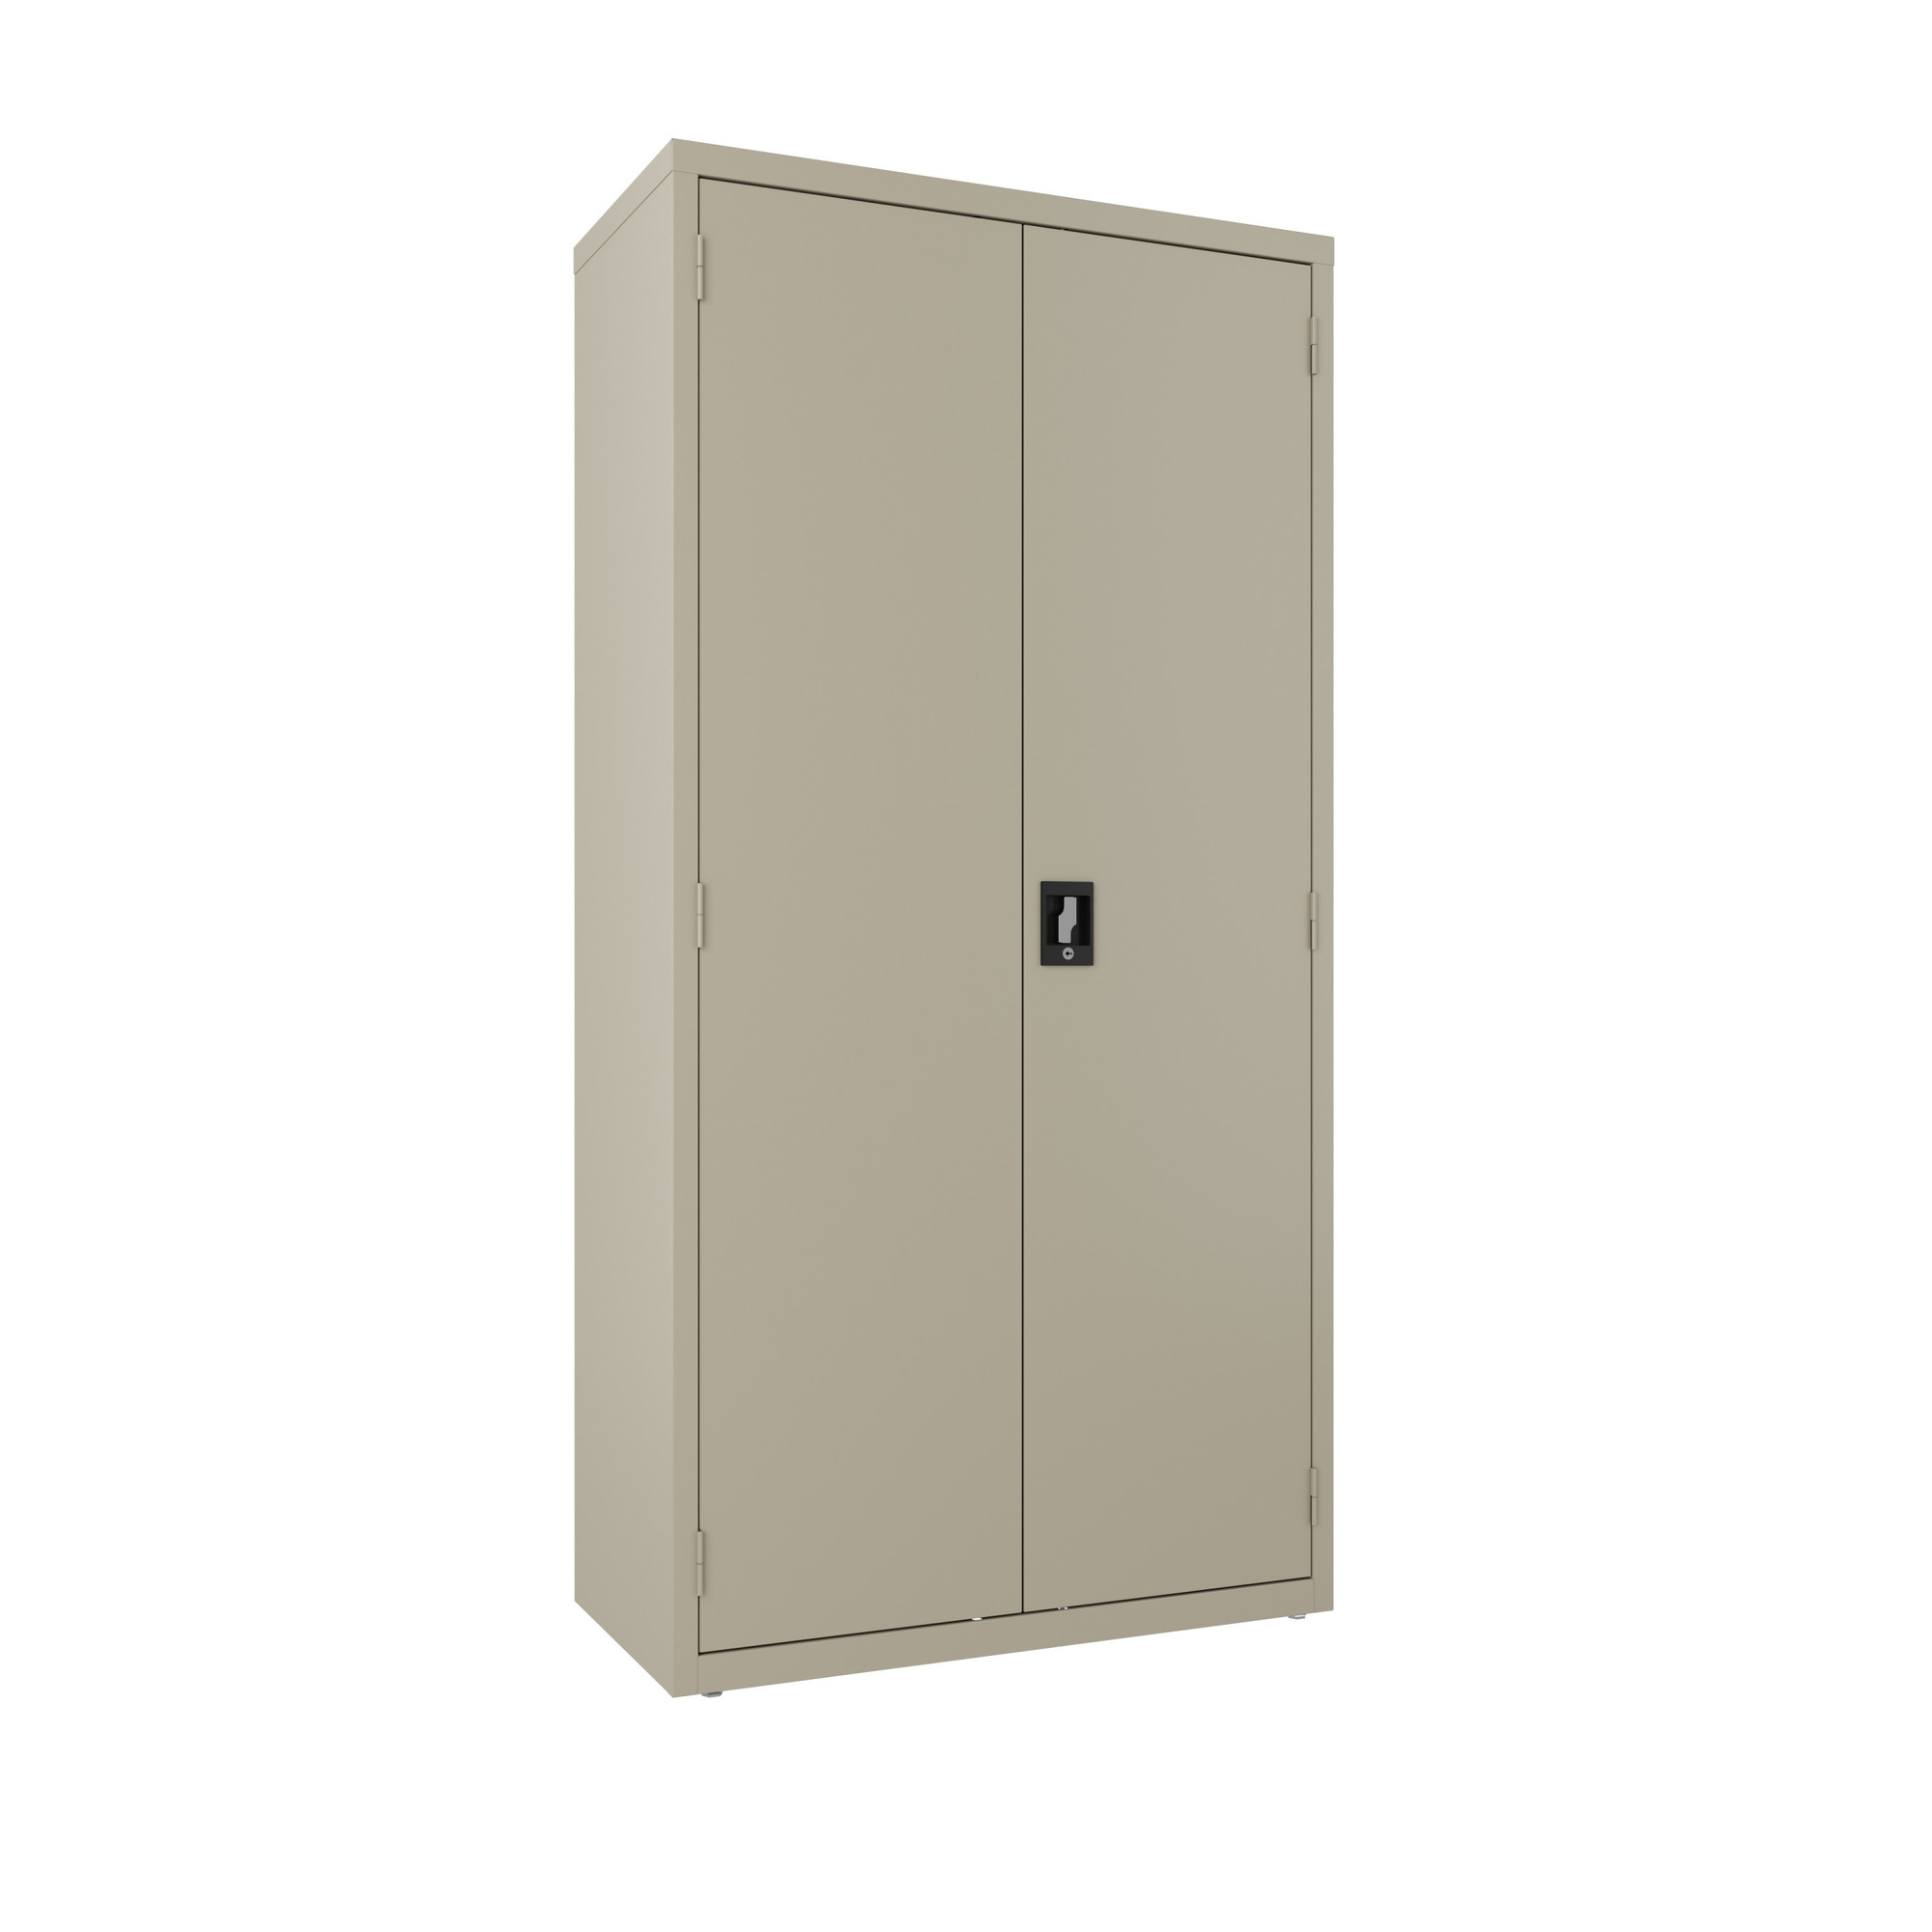 Hirsh Industries, Janitorial Cabinet, Height 72 in, Width 36 in, Color Putty, Model 24032